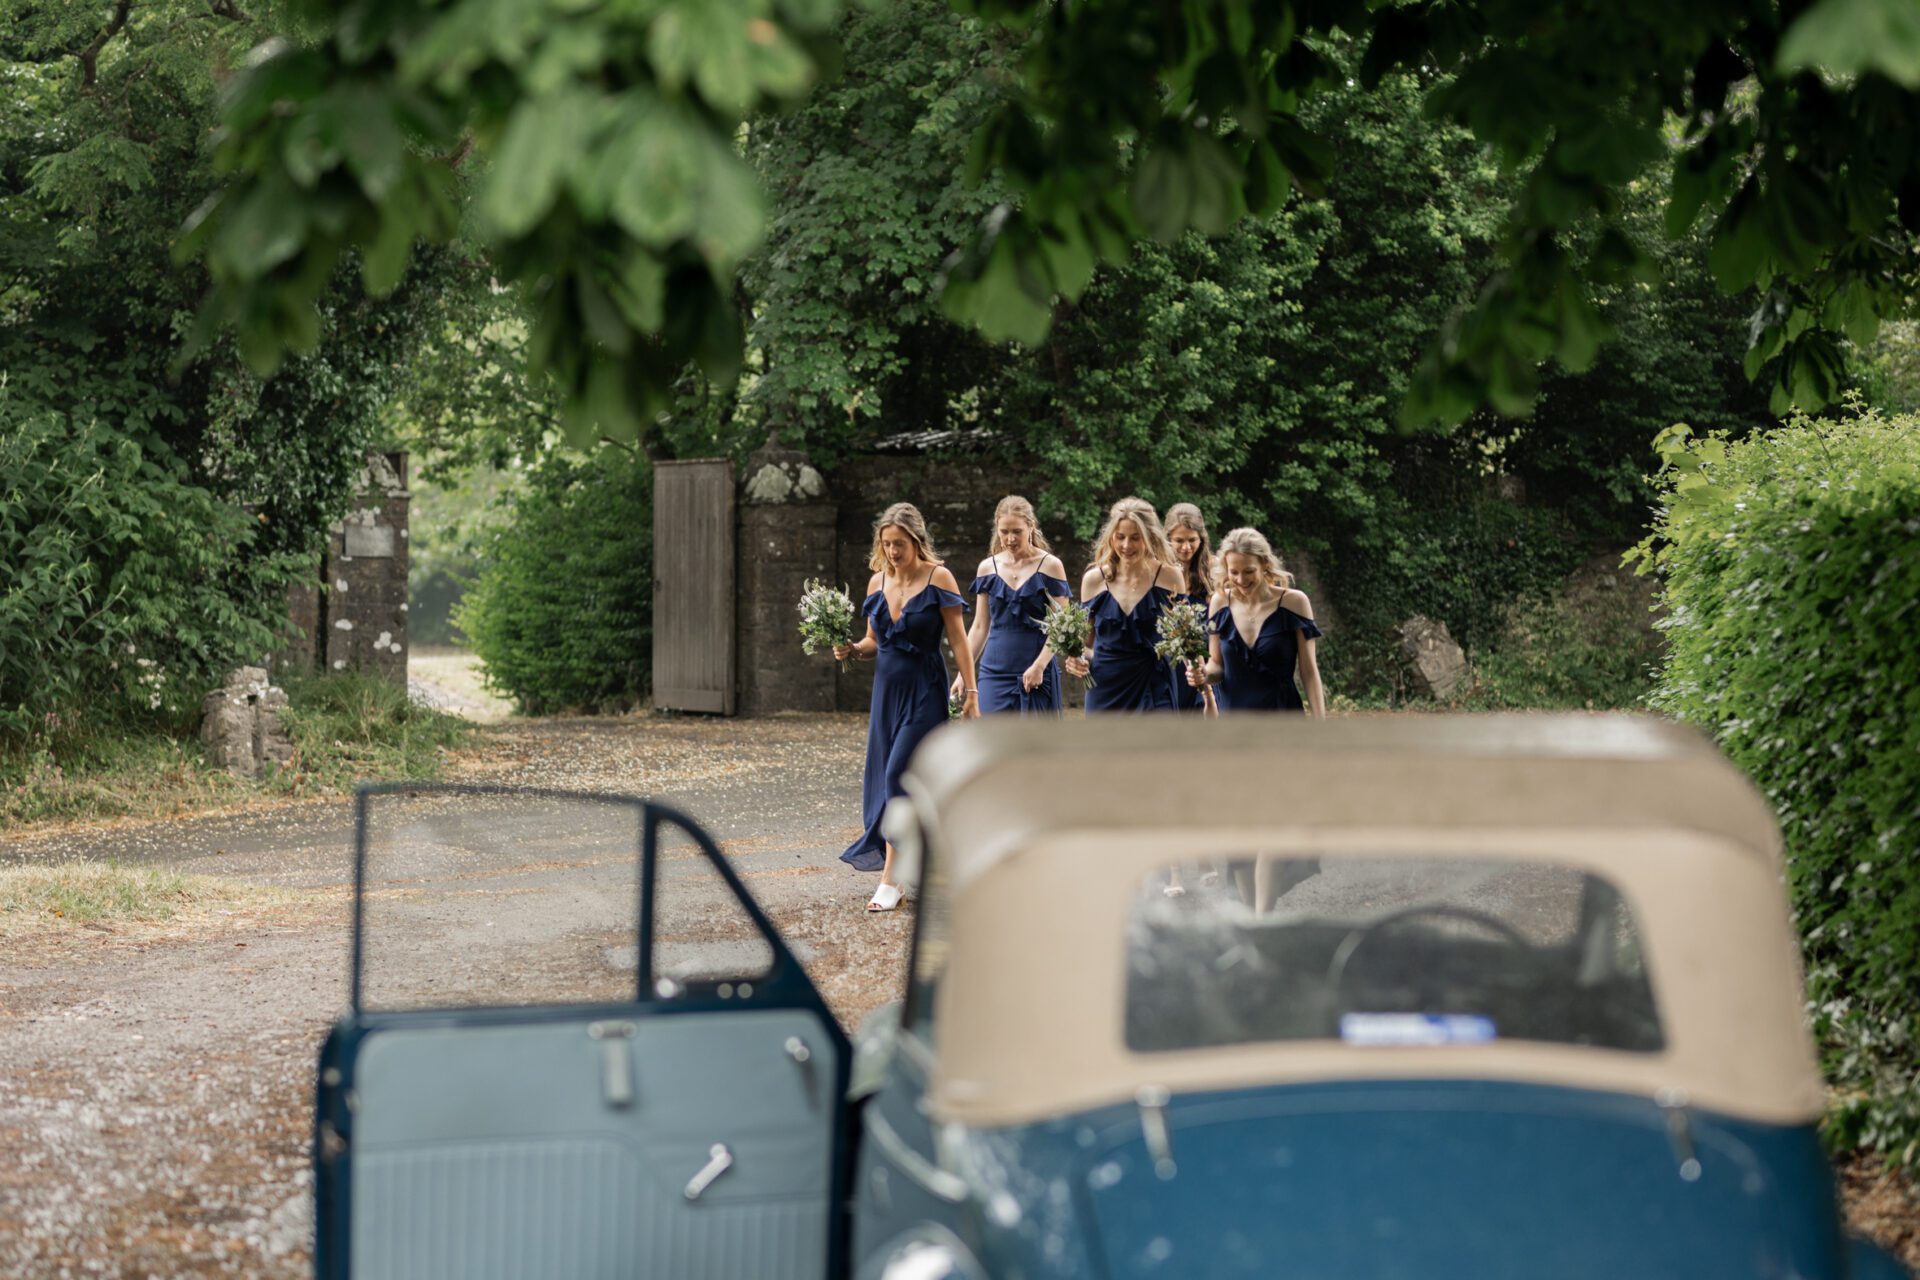 The bridal party await the bride as she exits the vintage wedding car